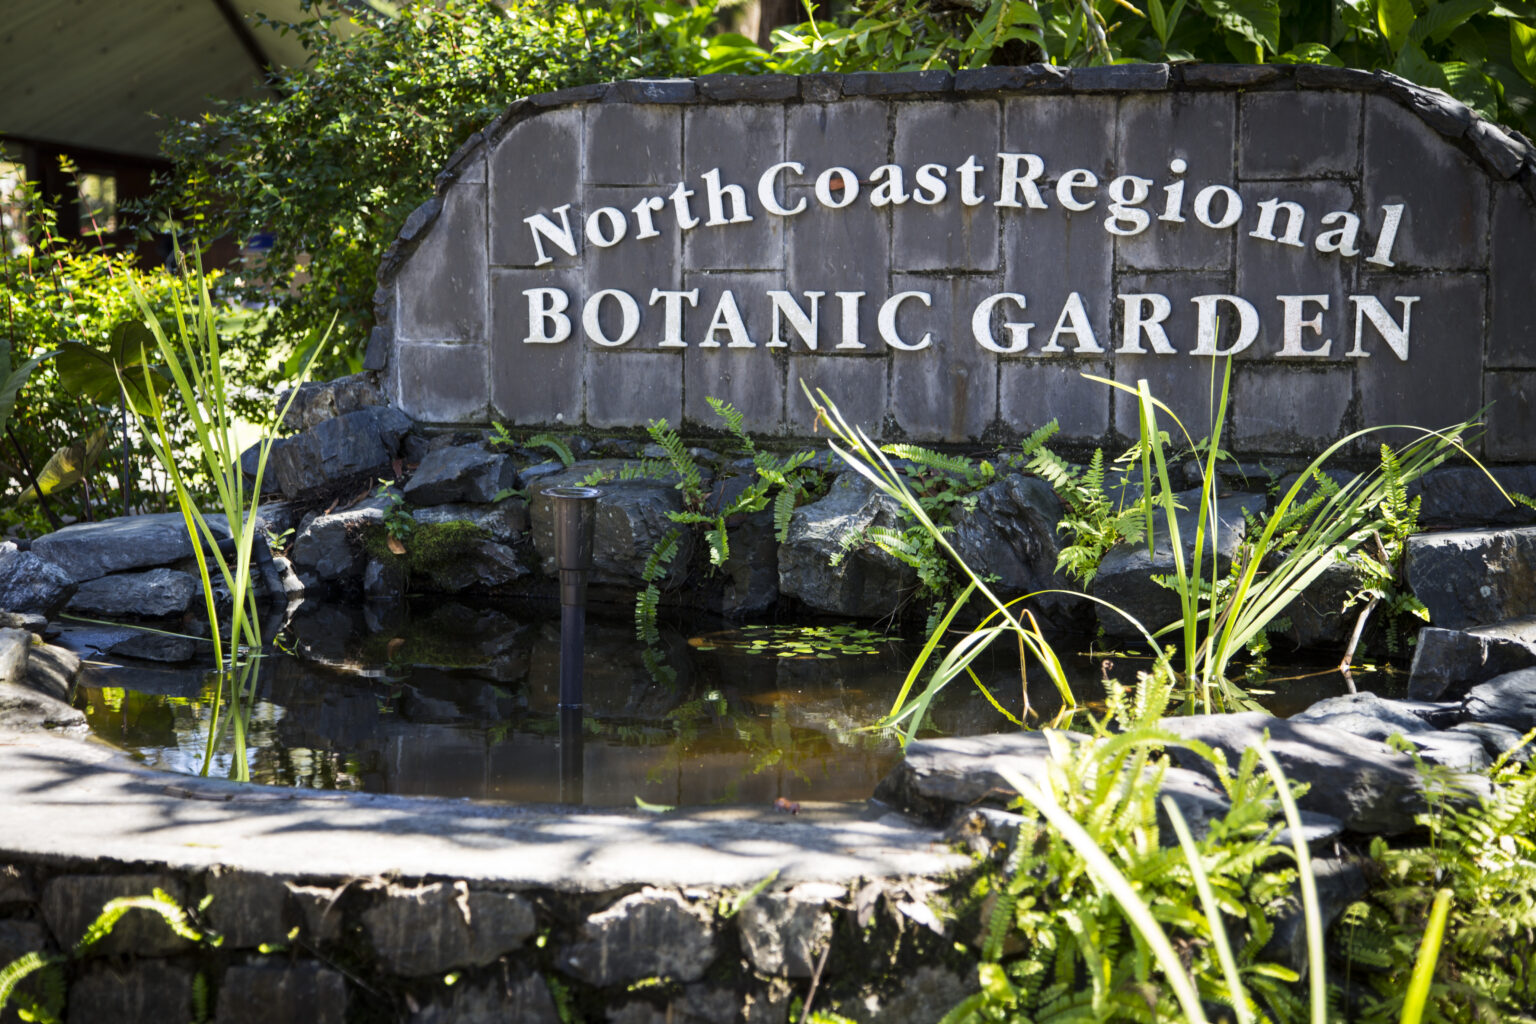 Entry To The Botanic Gardens Is Free